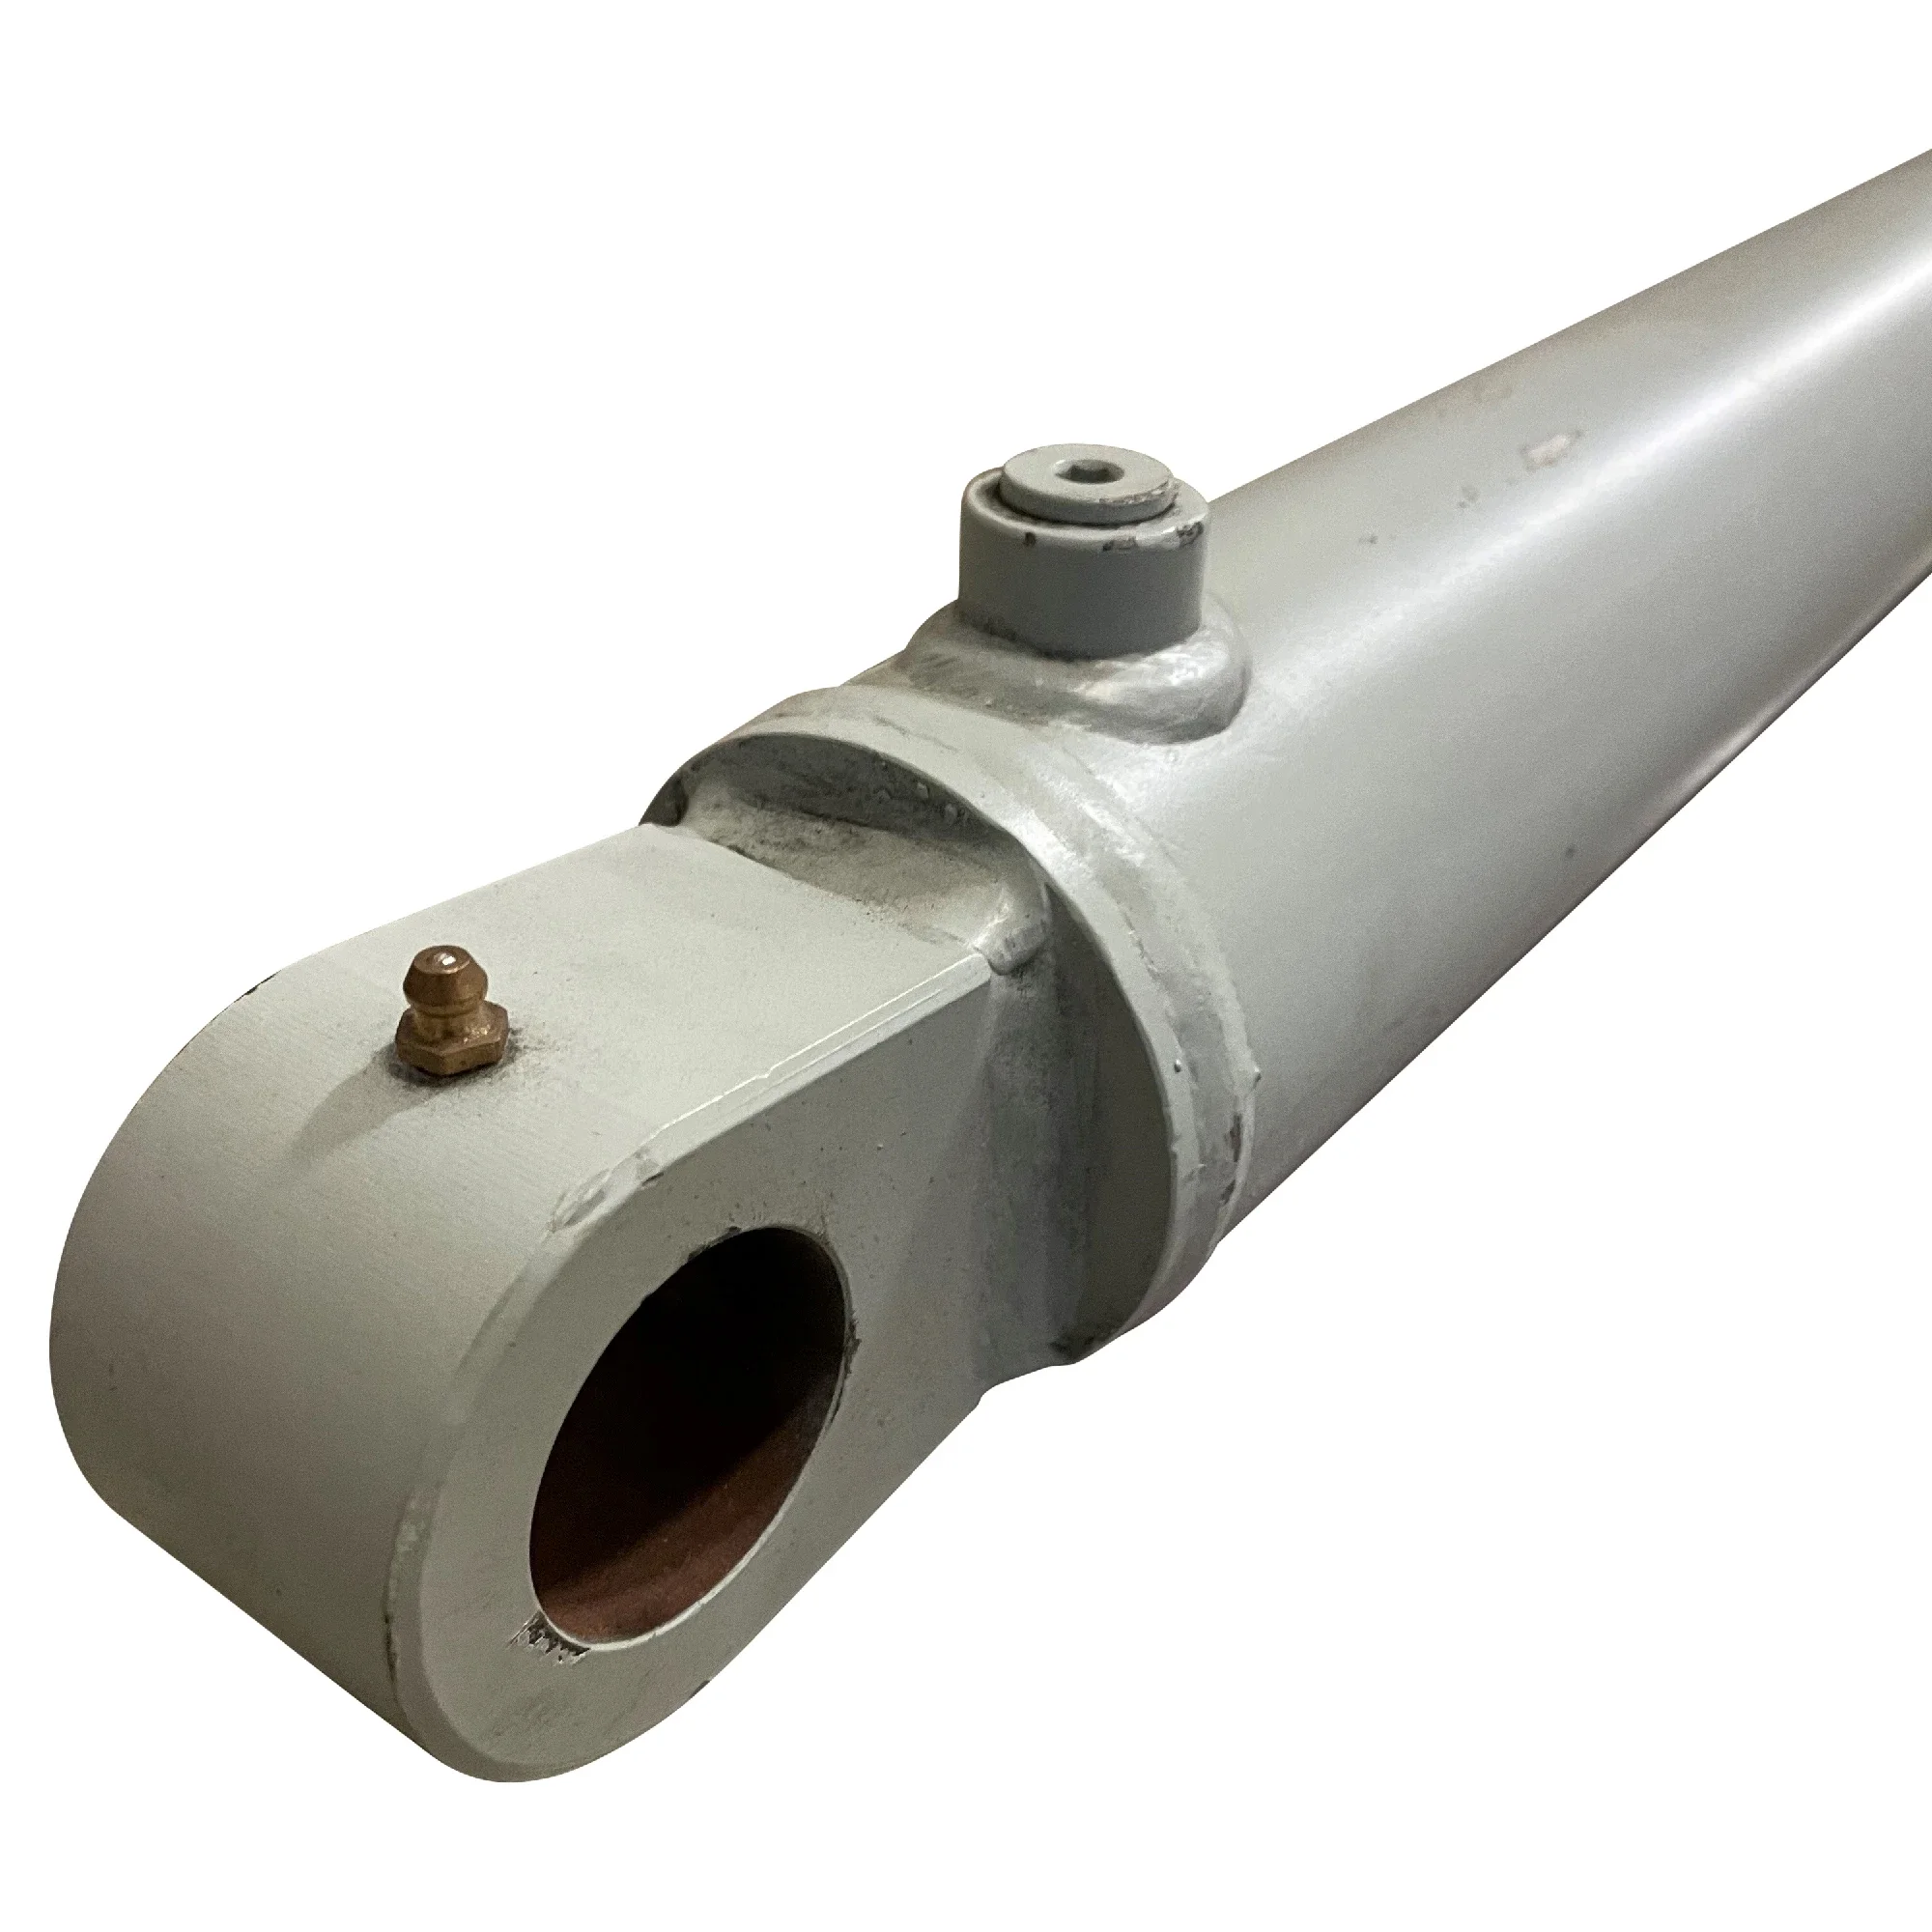 Wastebuilt® Replacement for Heil 27-1/2" x 3-1/2" Container Arm Cylinder, 5000